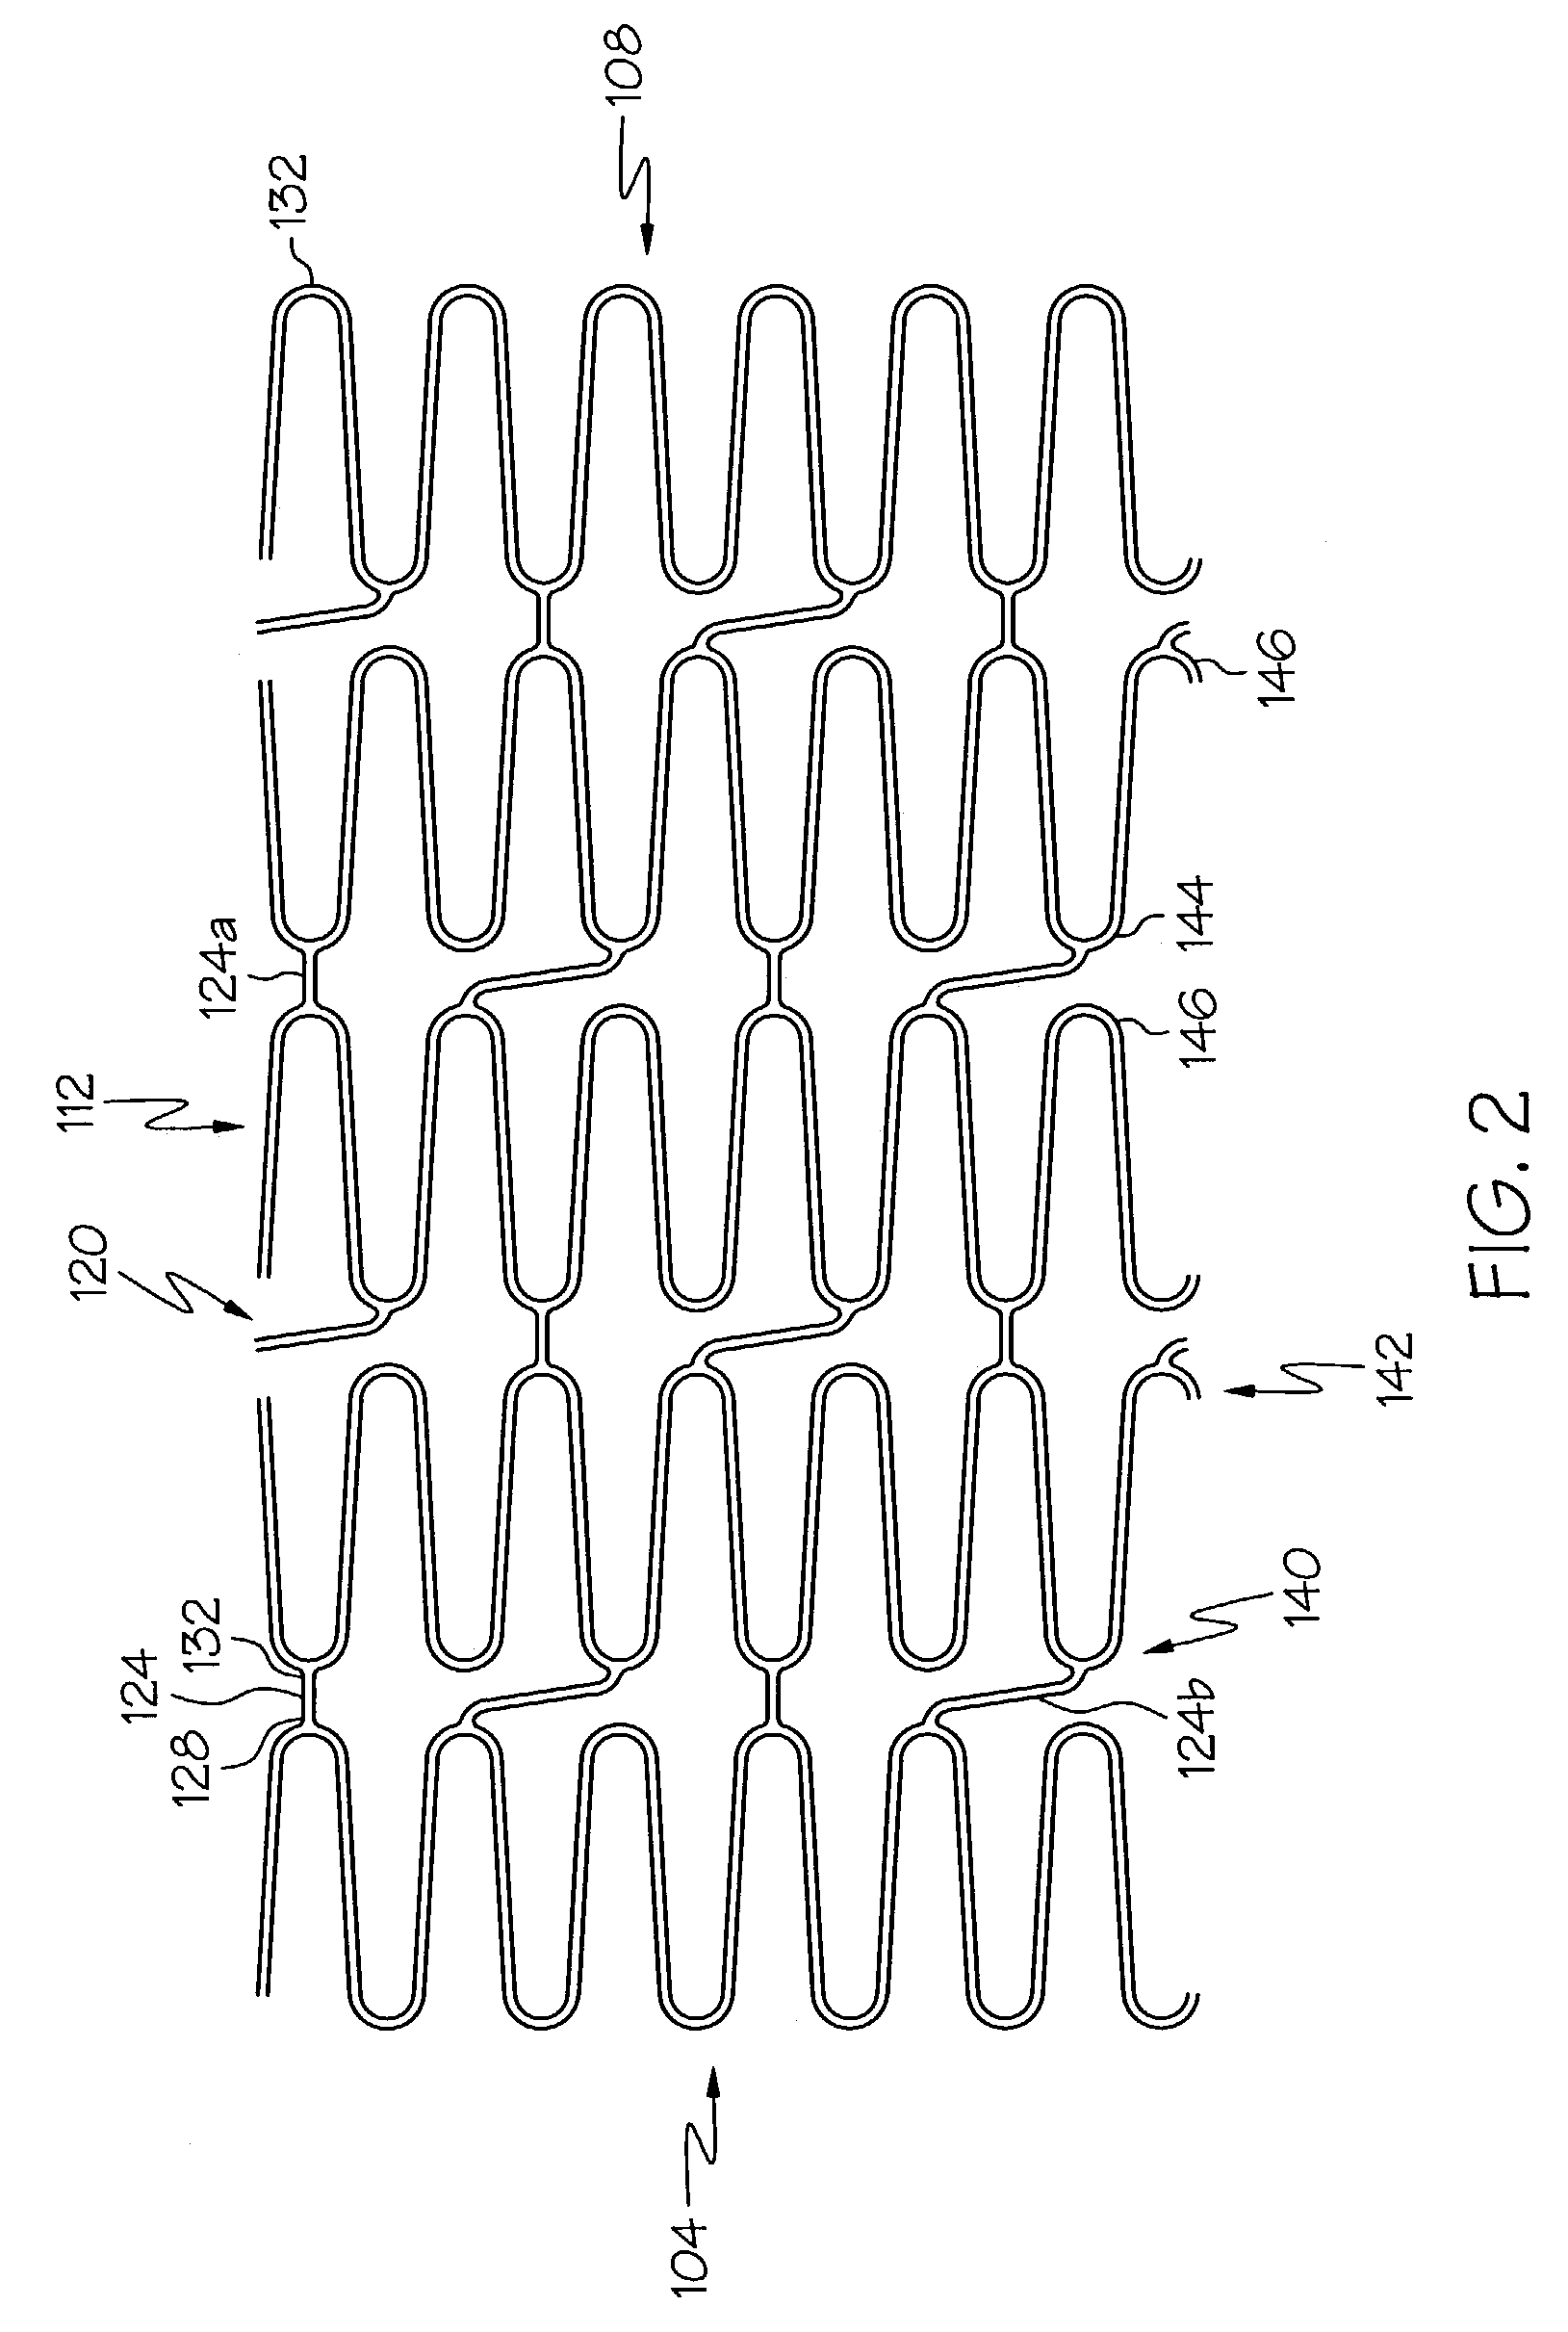 Varying circumferential spanned connectors in a stent